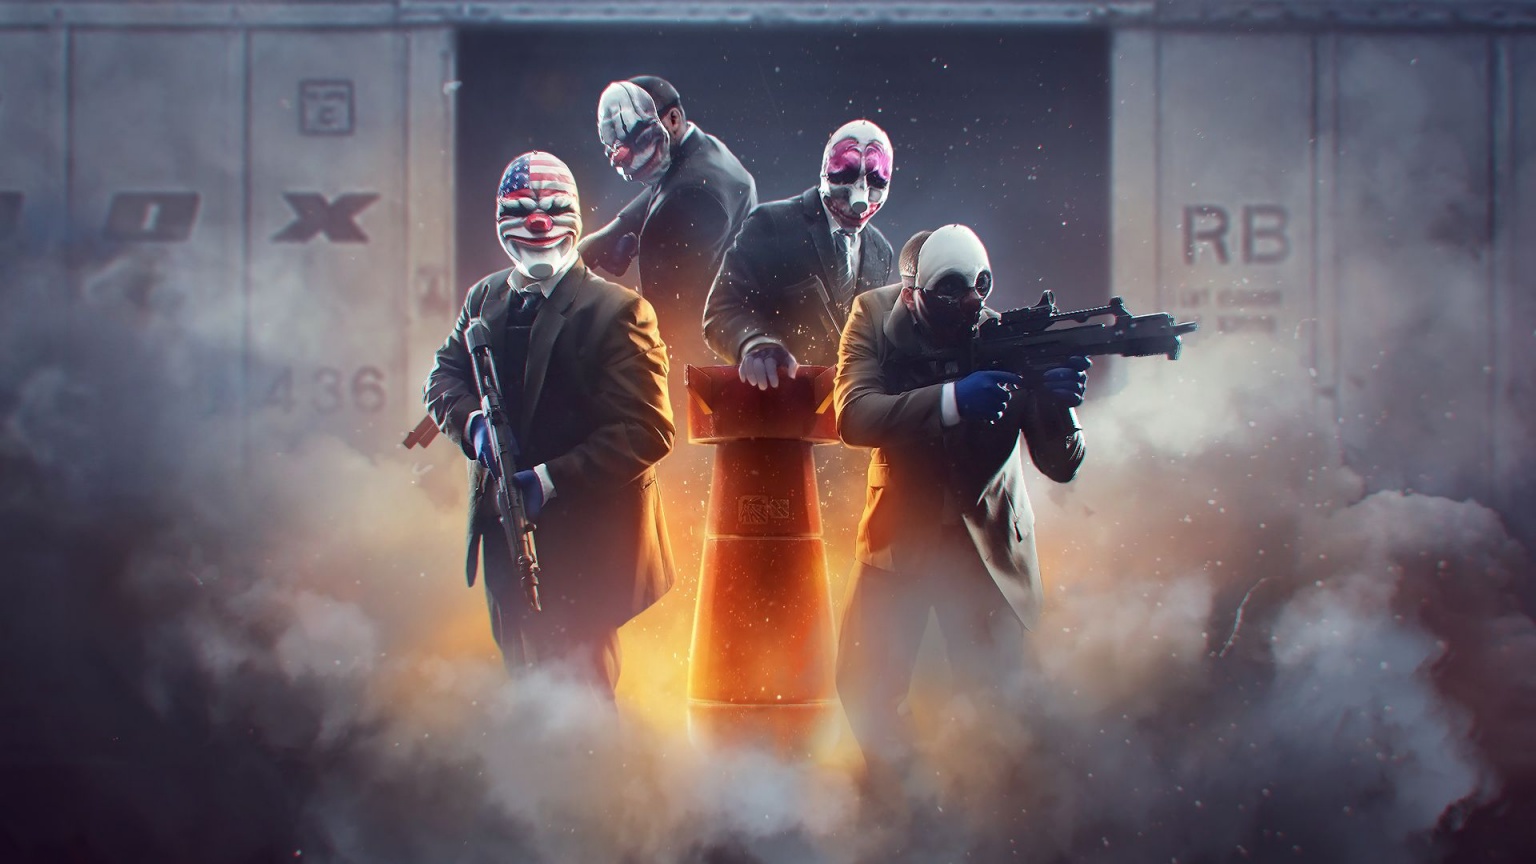 payday 3 release date 2020